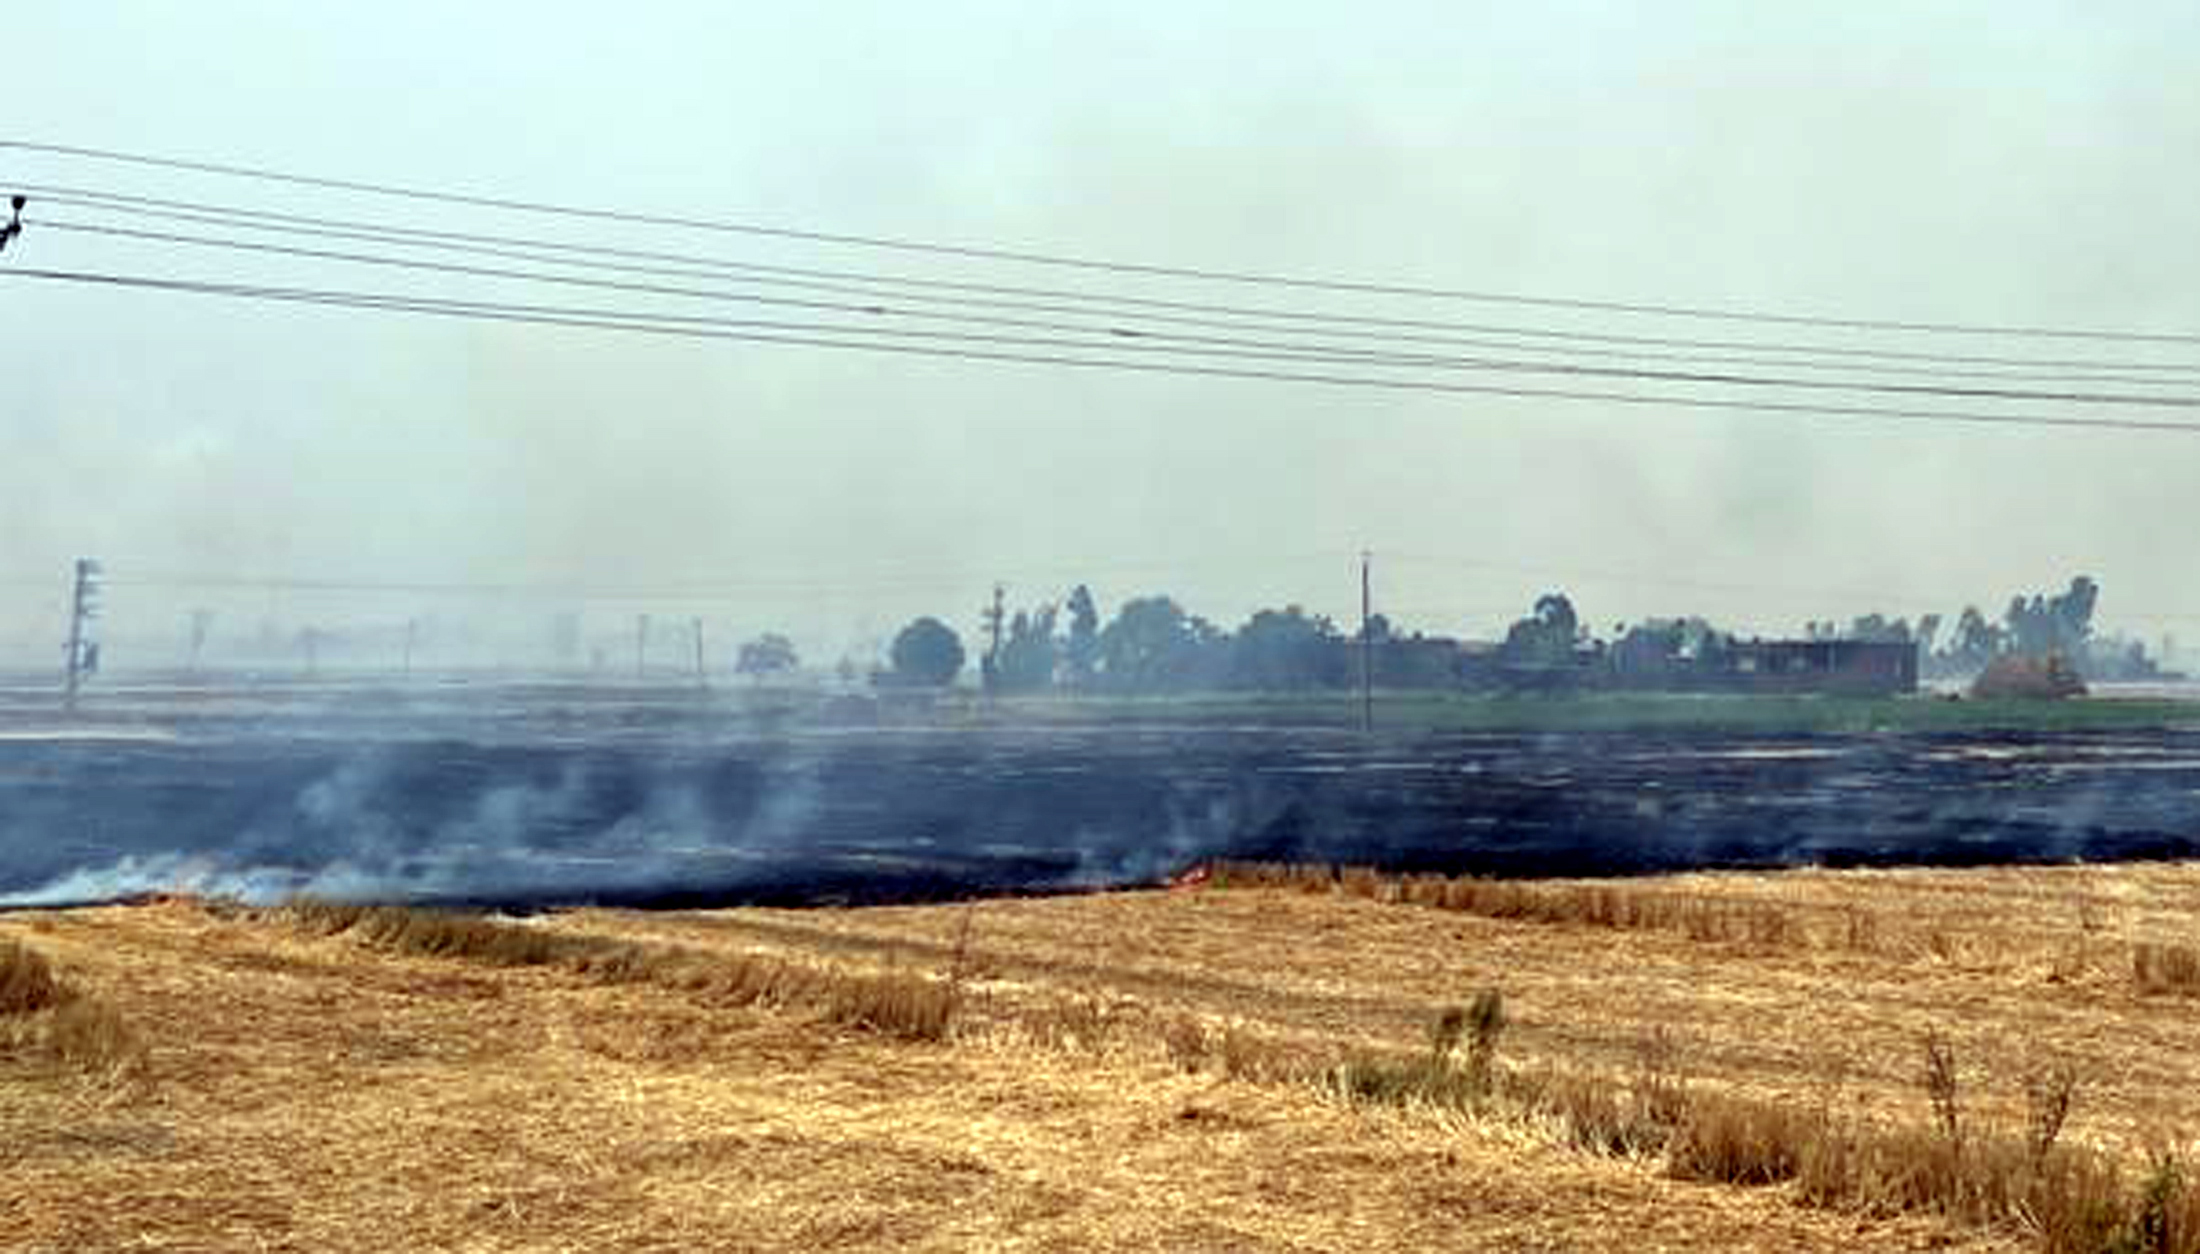 Stubble burning on the rise in Amritsar as farmers get ready for next crop